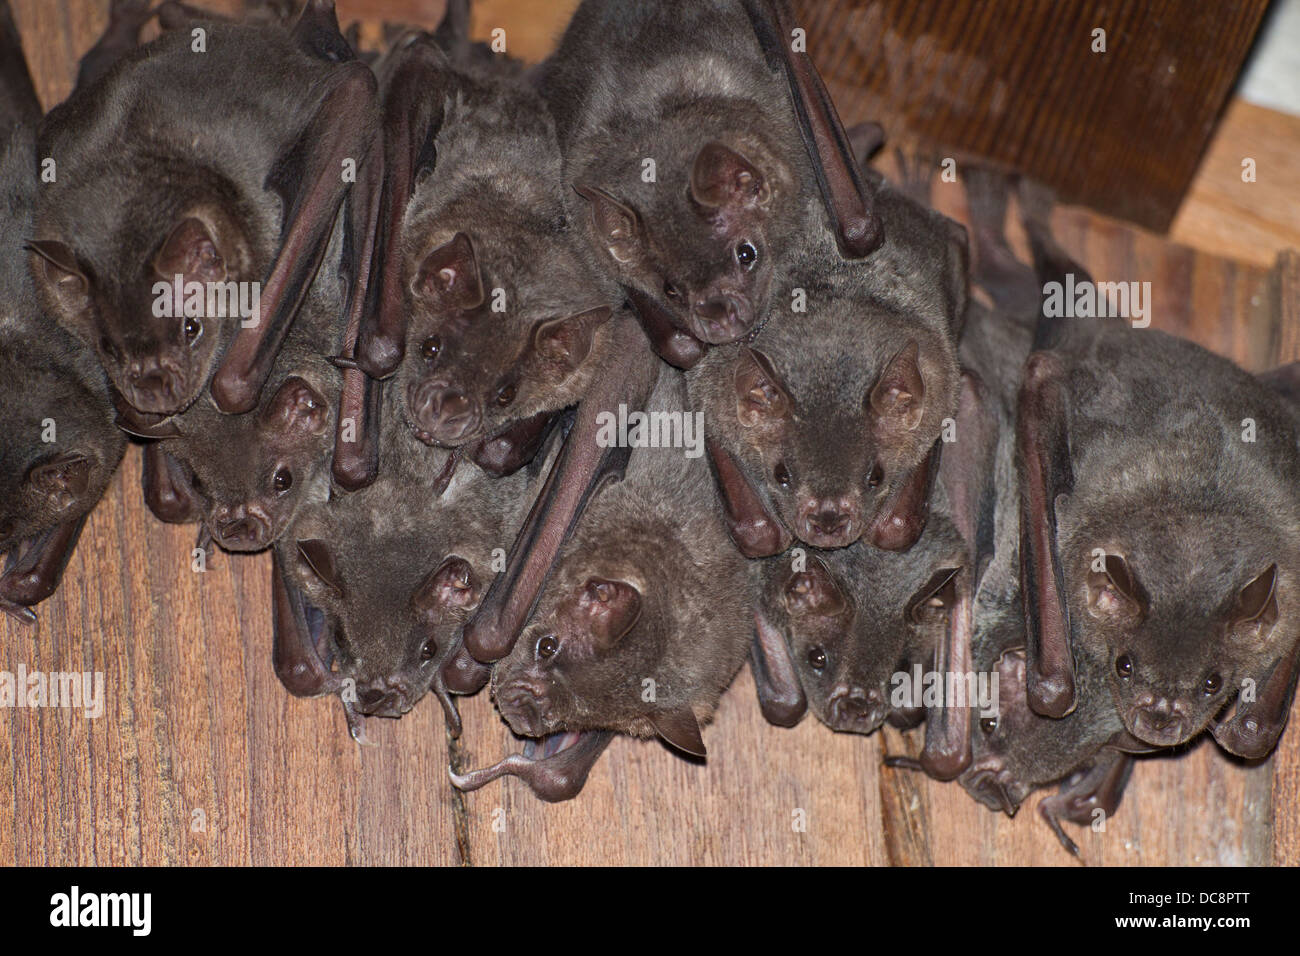 Bats roosting together near the Coco View Resort on the island of Roatan, Honduras. Stock Photo